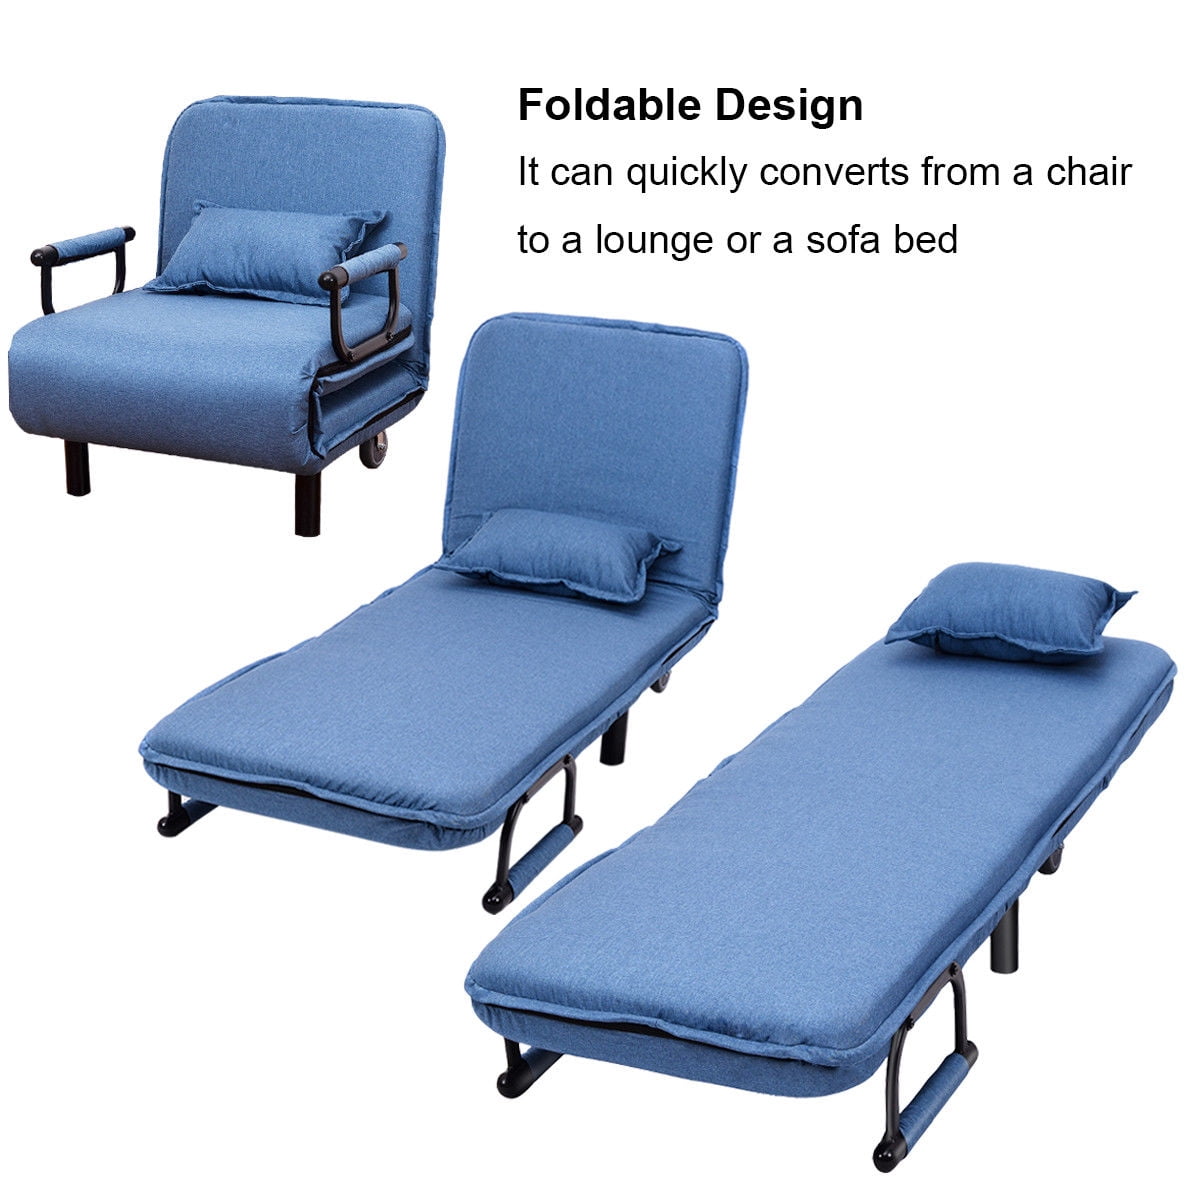 Costway Convertible Sofa Bed Folding Arm Chair Sleeper Leisure